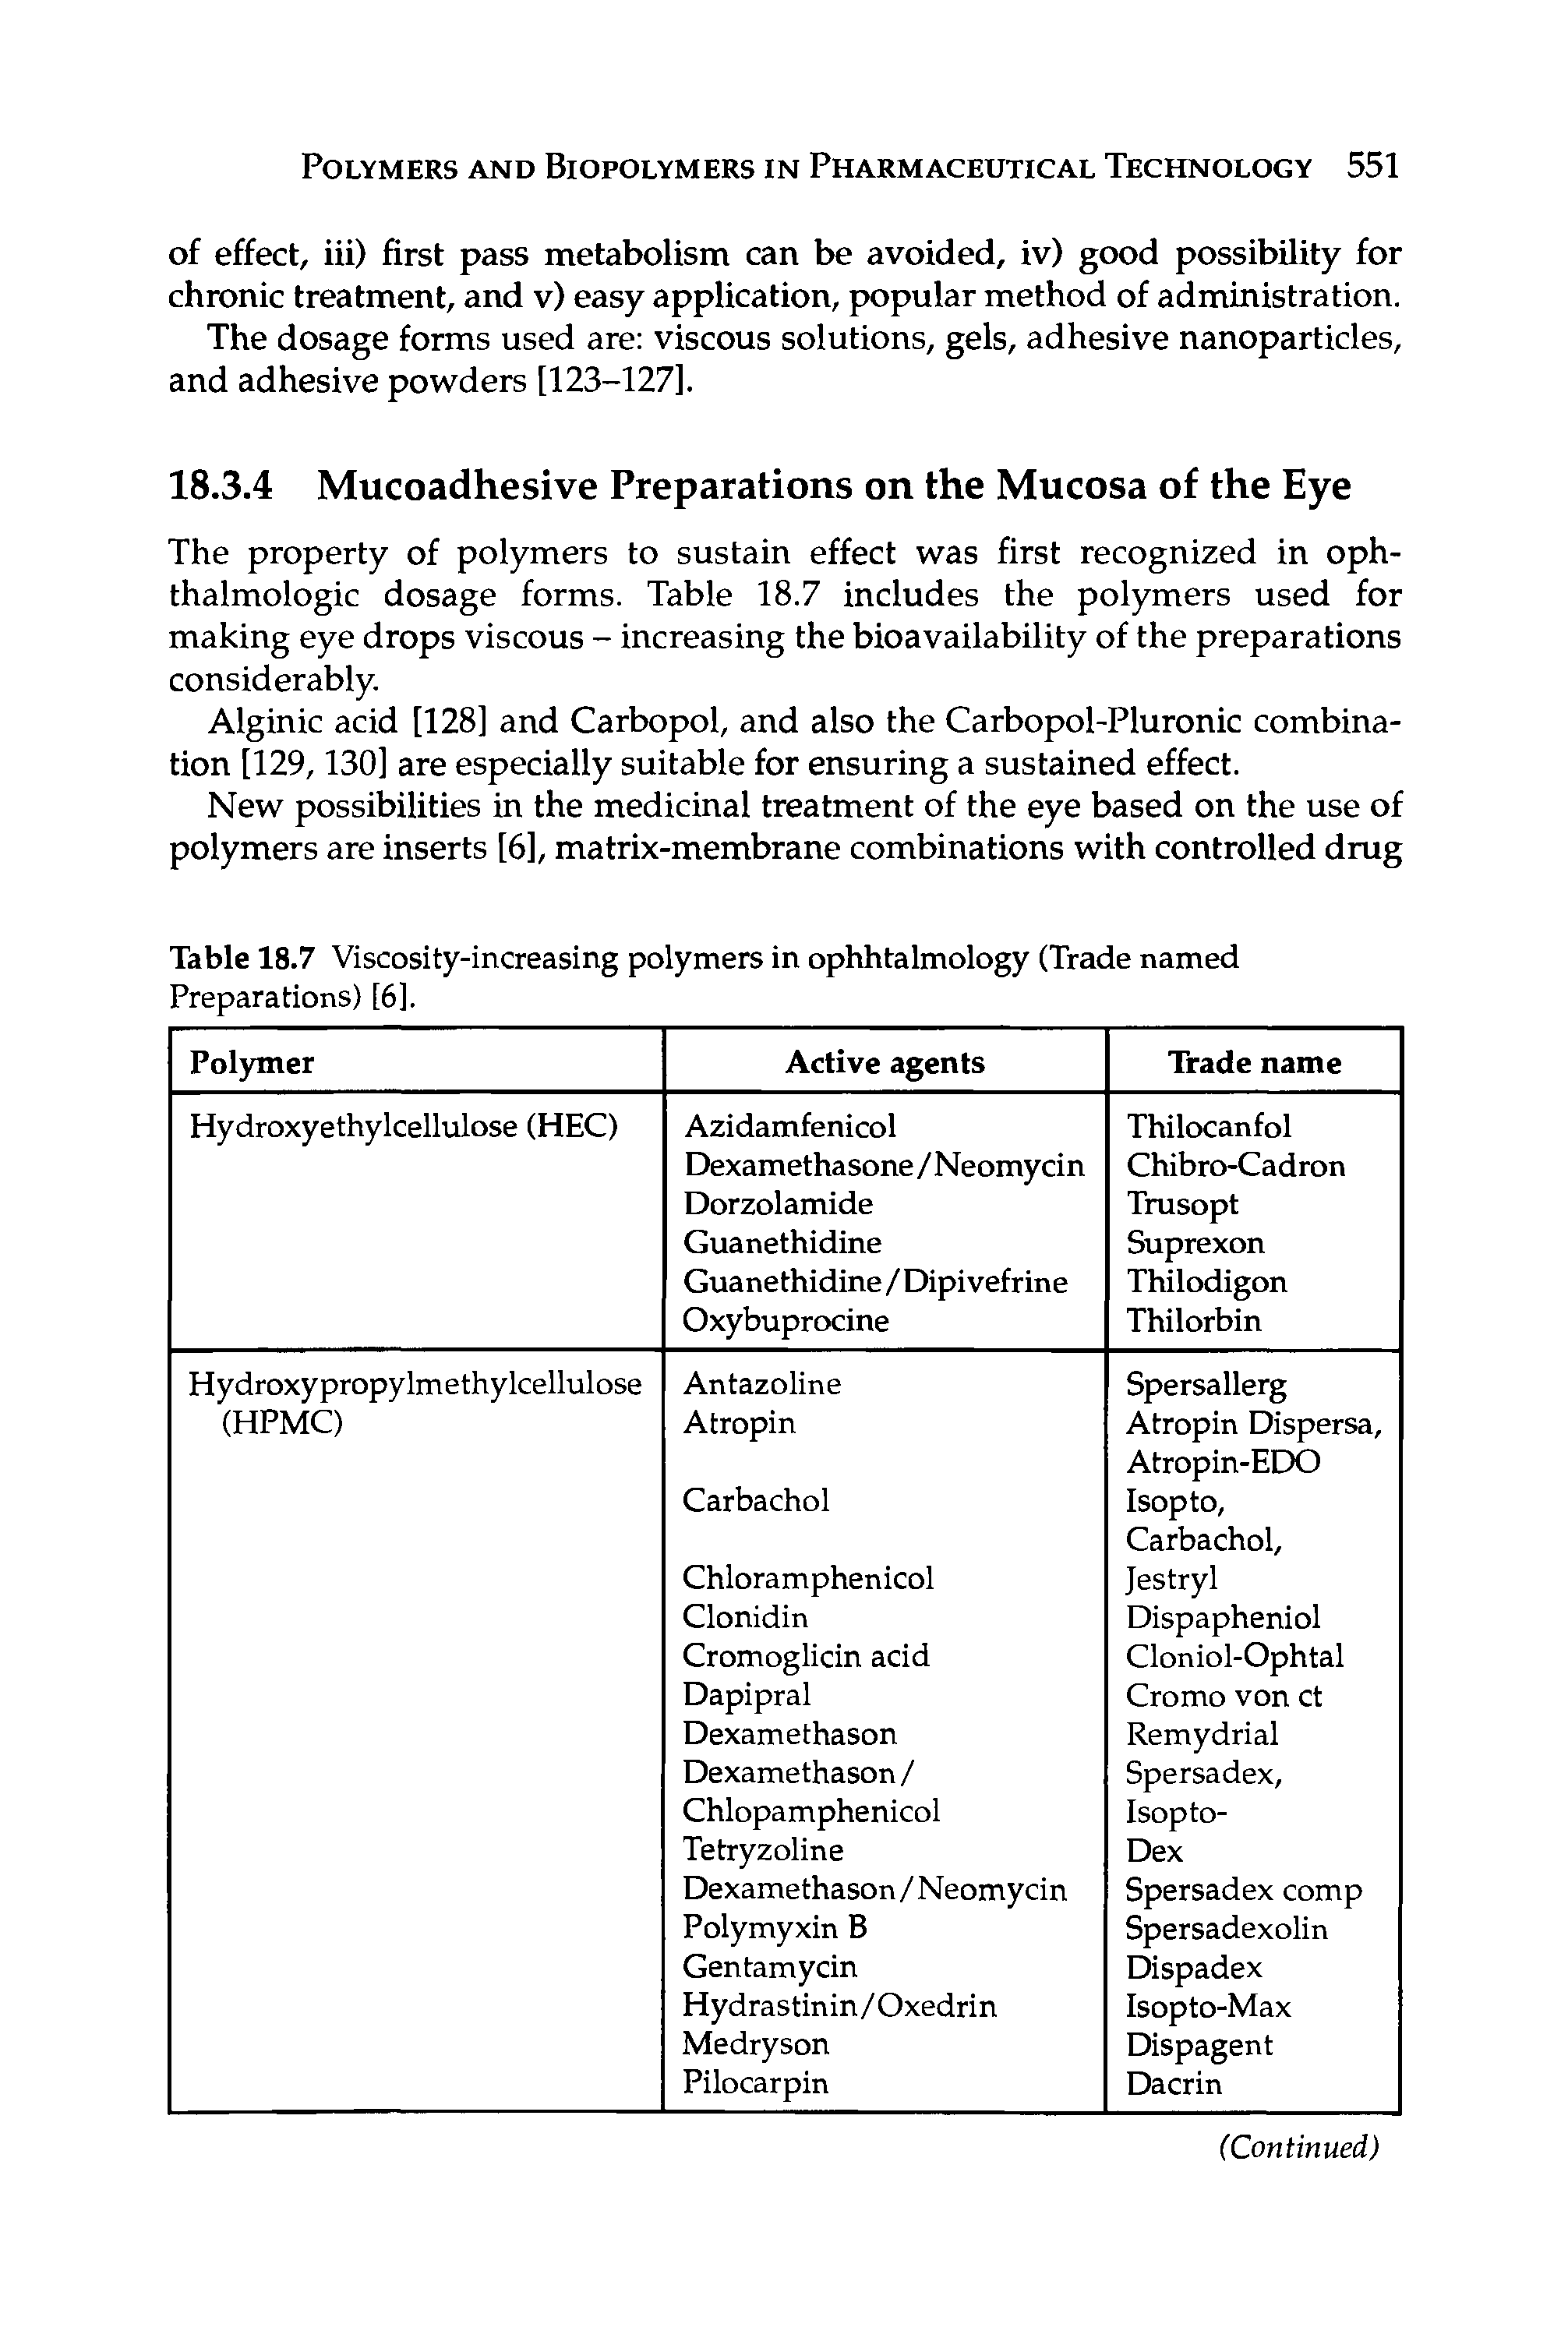 Table 18.7 Viscosity-increasing polymers in ophhtalmology (Trade named Preparations) [6].